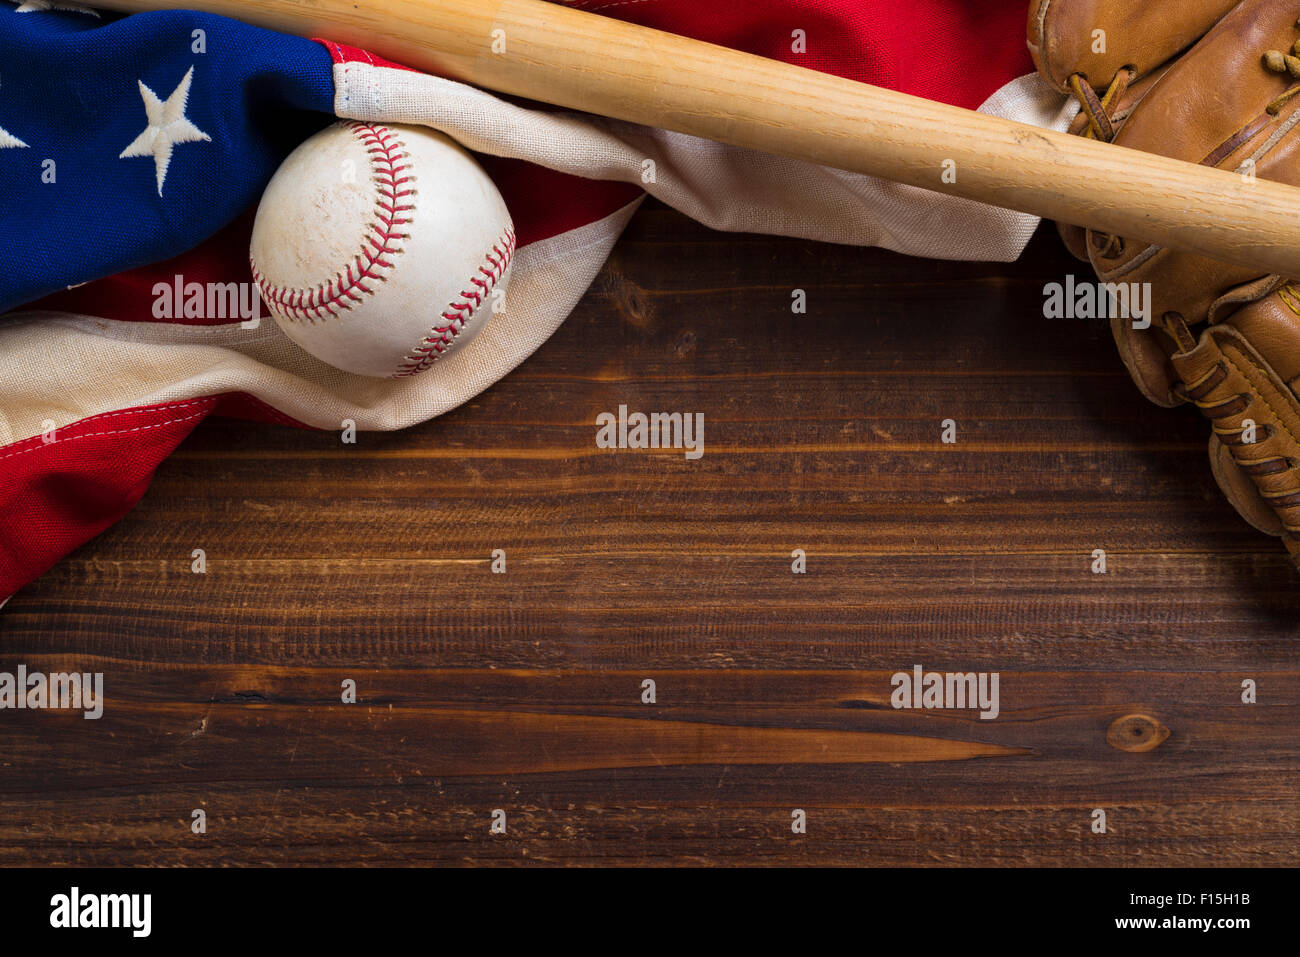 An old, antique American flag with vintage baseball equipment on a wooden bench Stock Photo